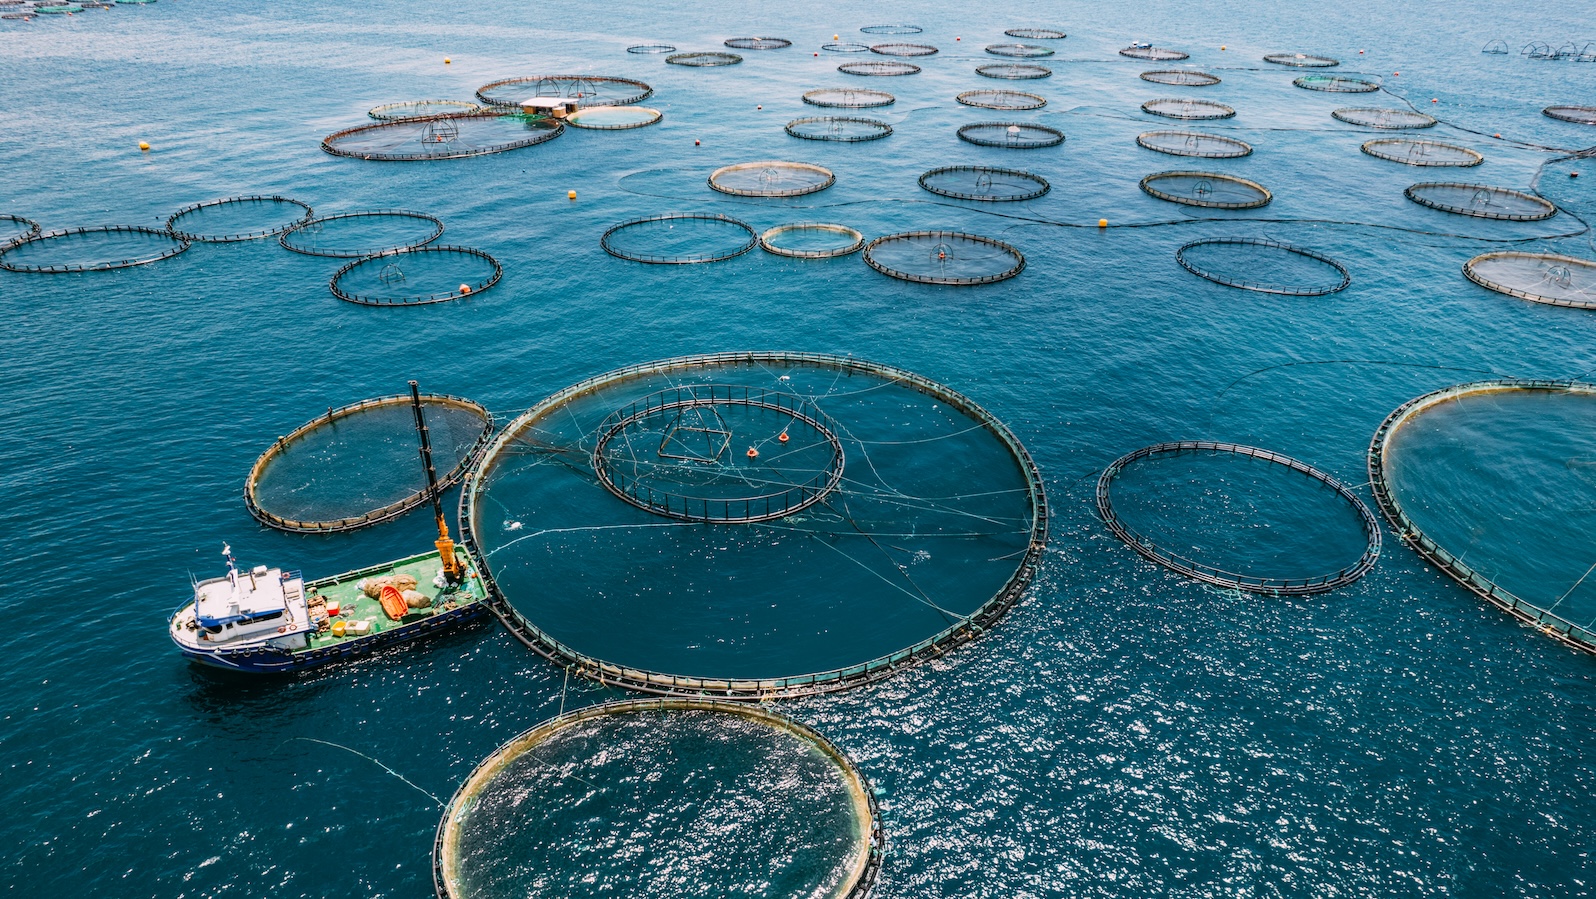 A ship approaches several large ring-like structures used for fish farming in the middle of a blue body of water